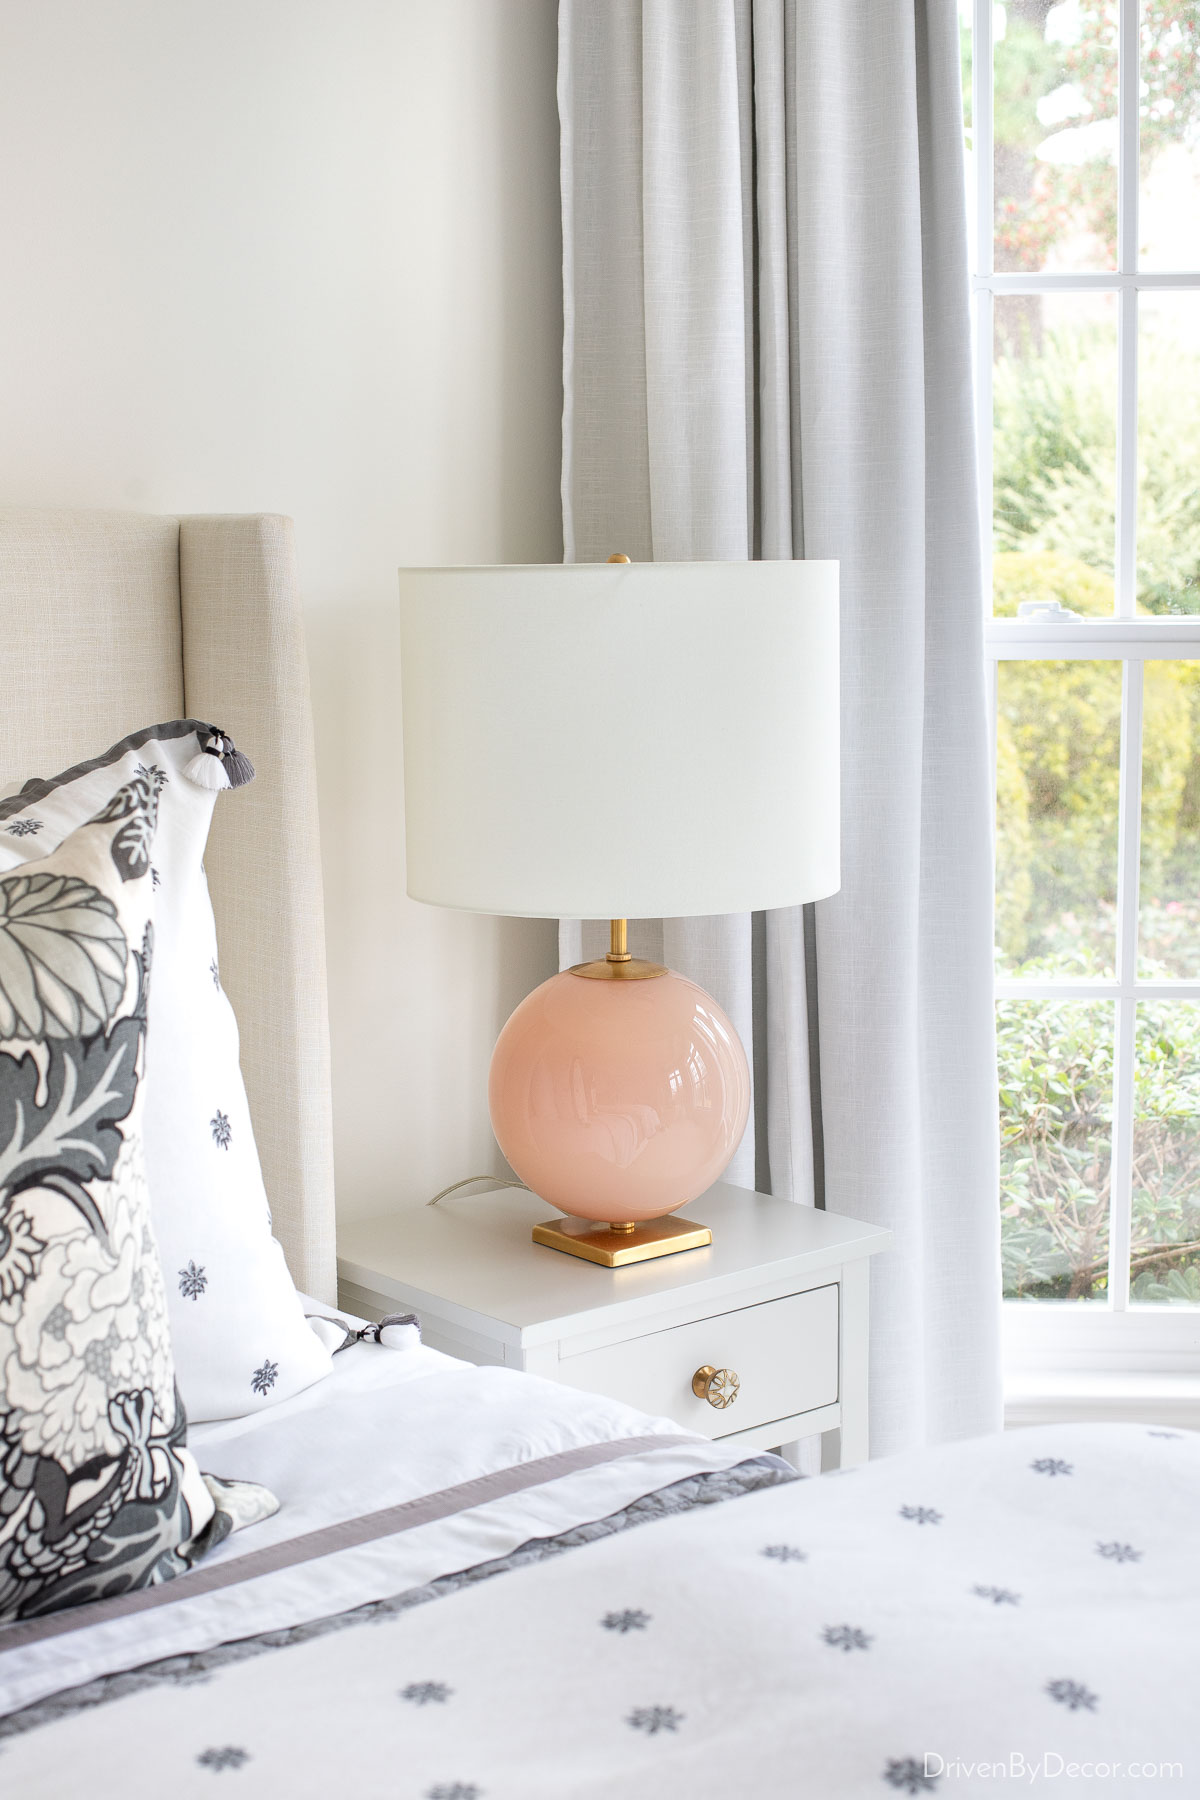 The bedroom lamps on our nightstands with a round blush base